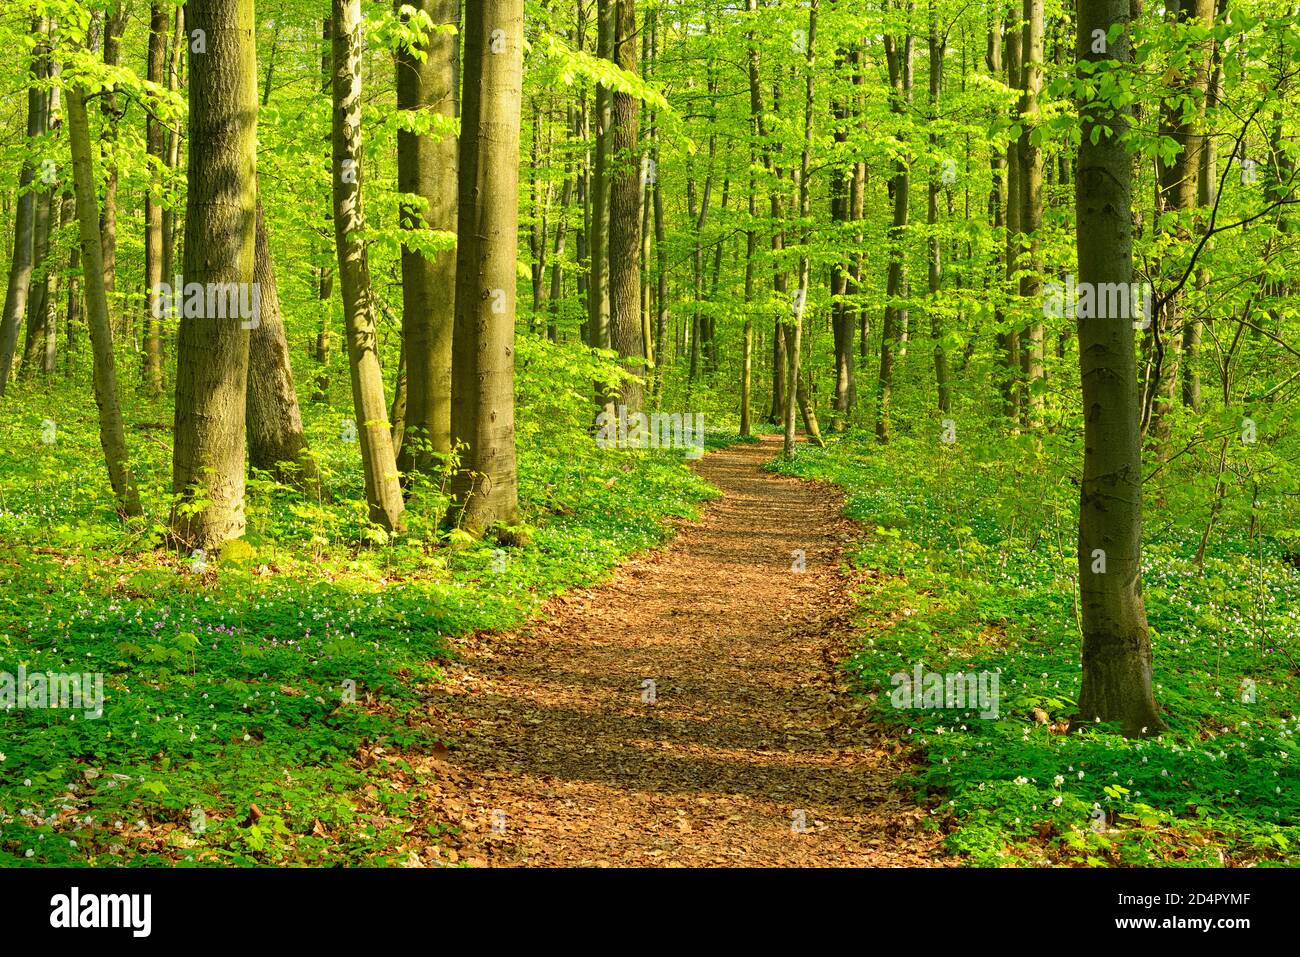 Semi Deciduous Forest High Resolution Stock Photography and Images - Alamy